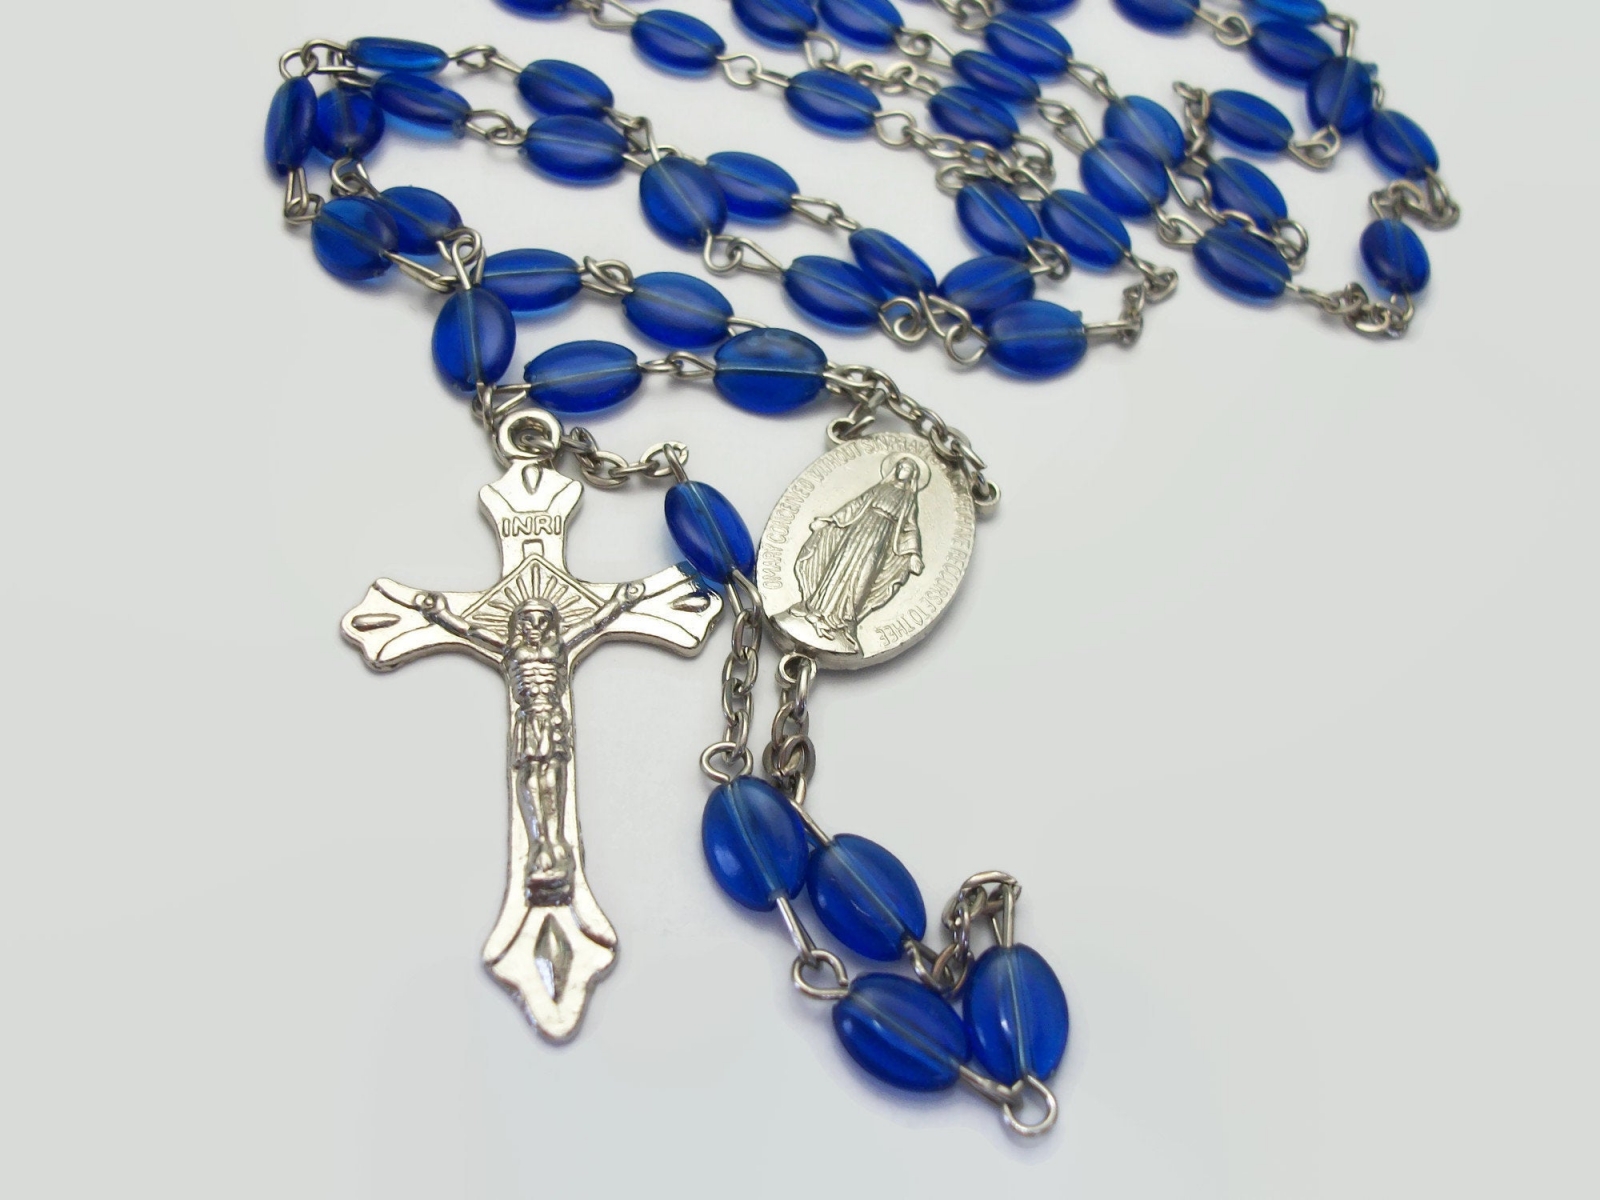 Vintage Plastic Blue Catholic Rosary Beads with Crucifix Cross and ...